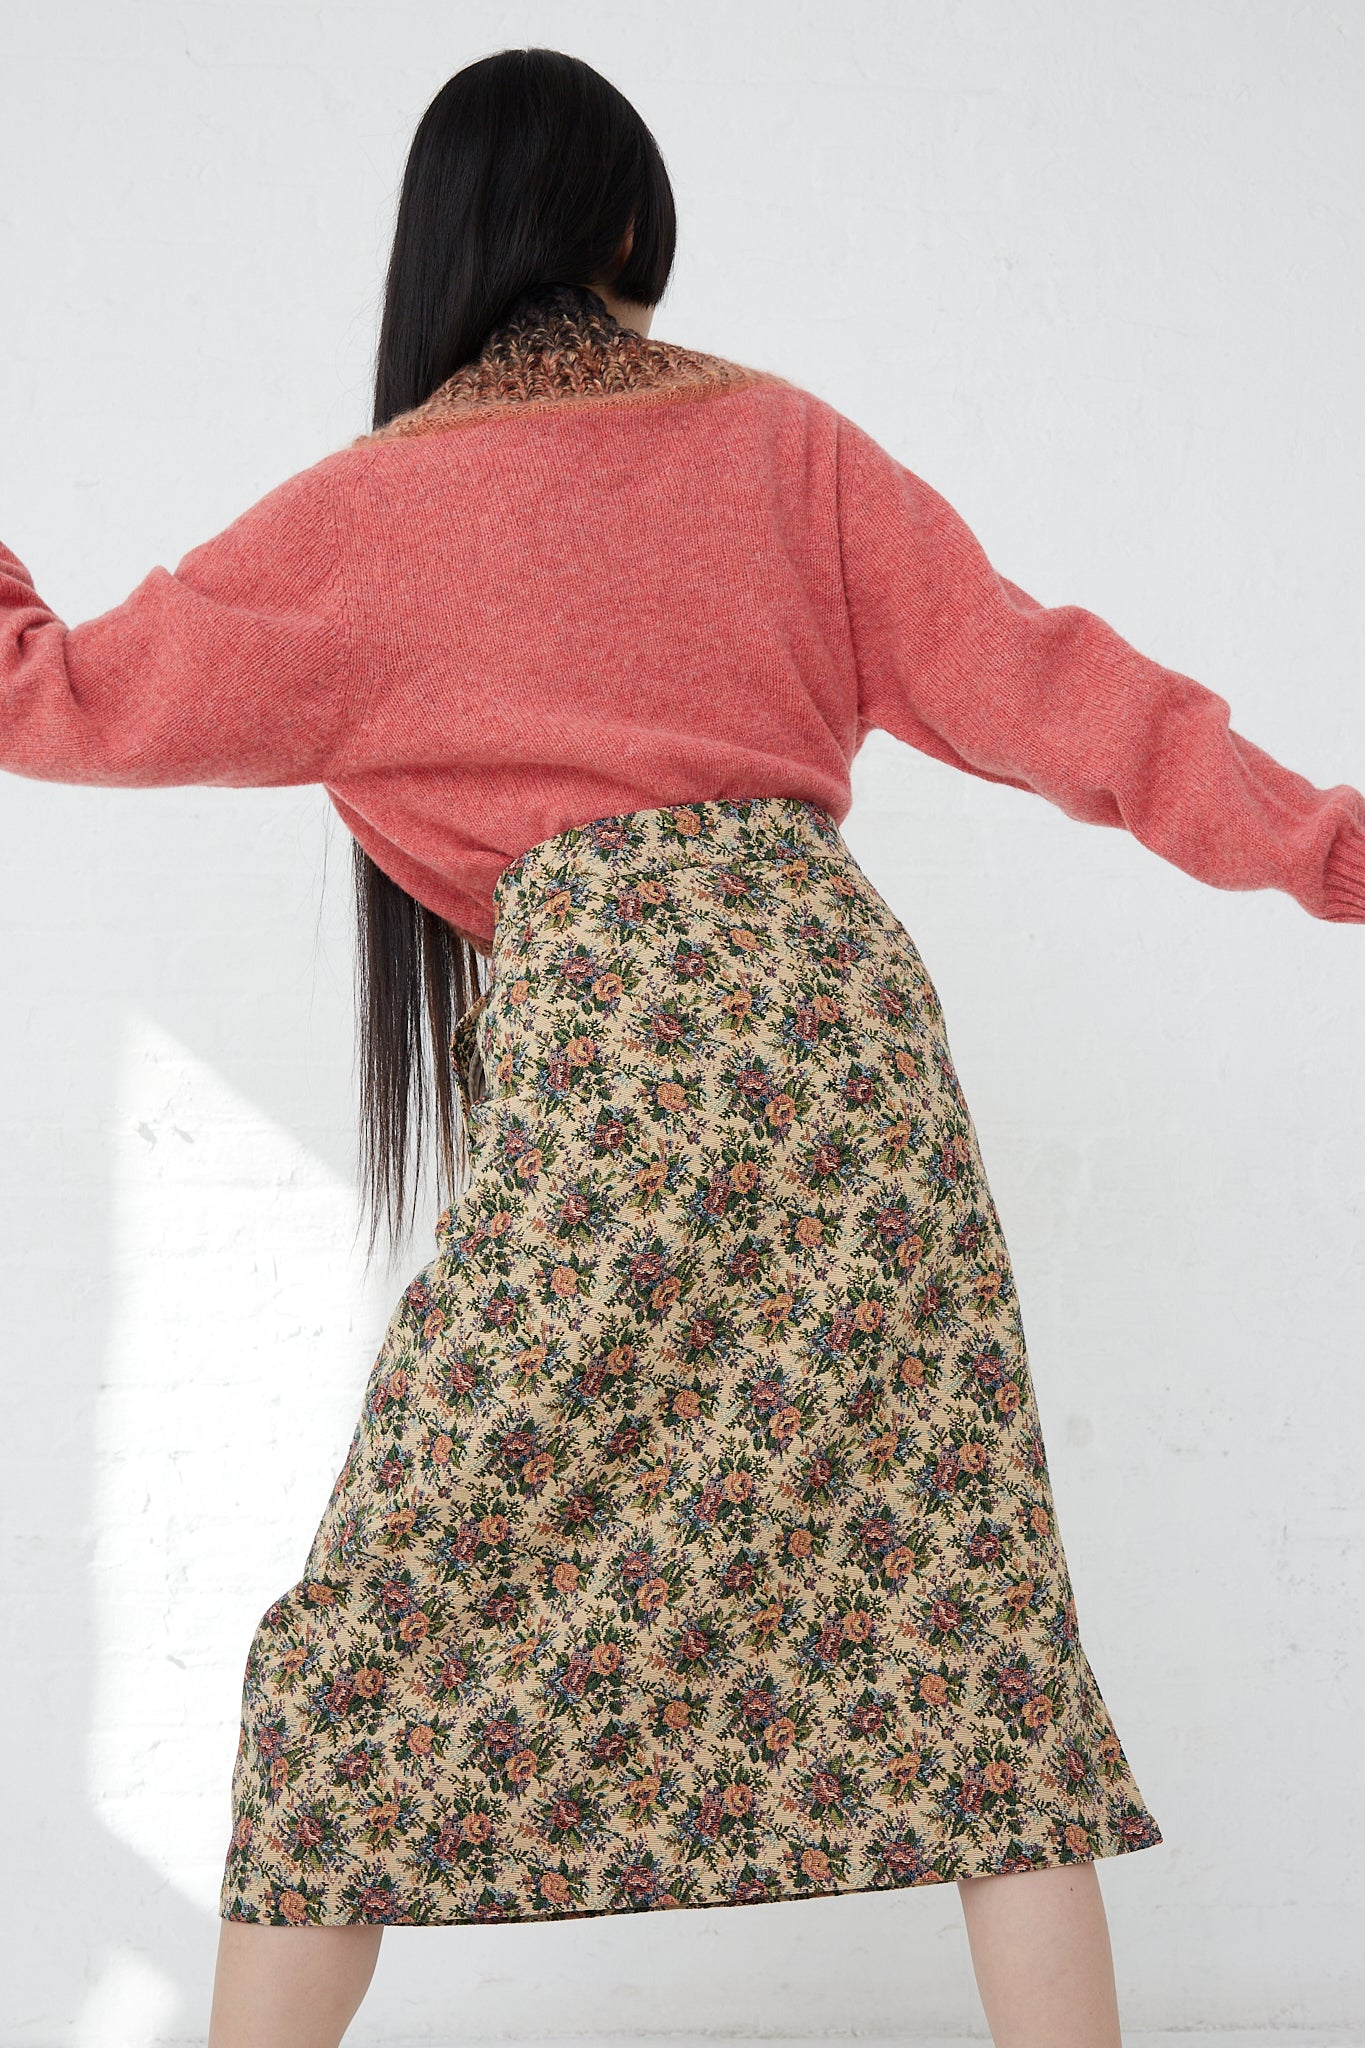 A woman in a pink sweater and SMLXL Skirt No. 75 in Flower from the Bless luxury lifestyle brand.